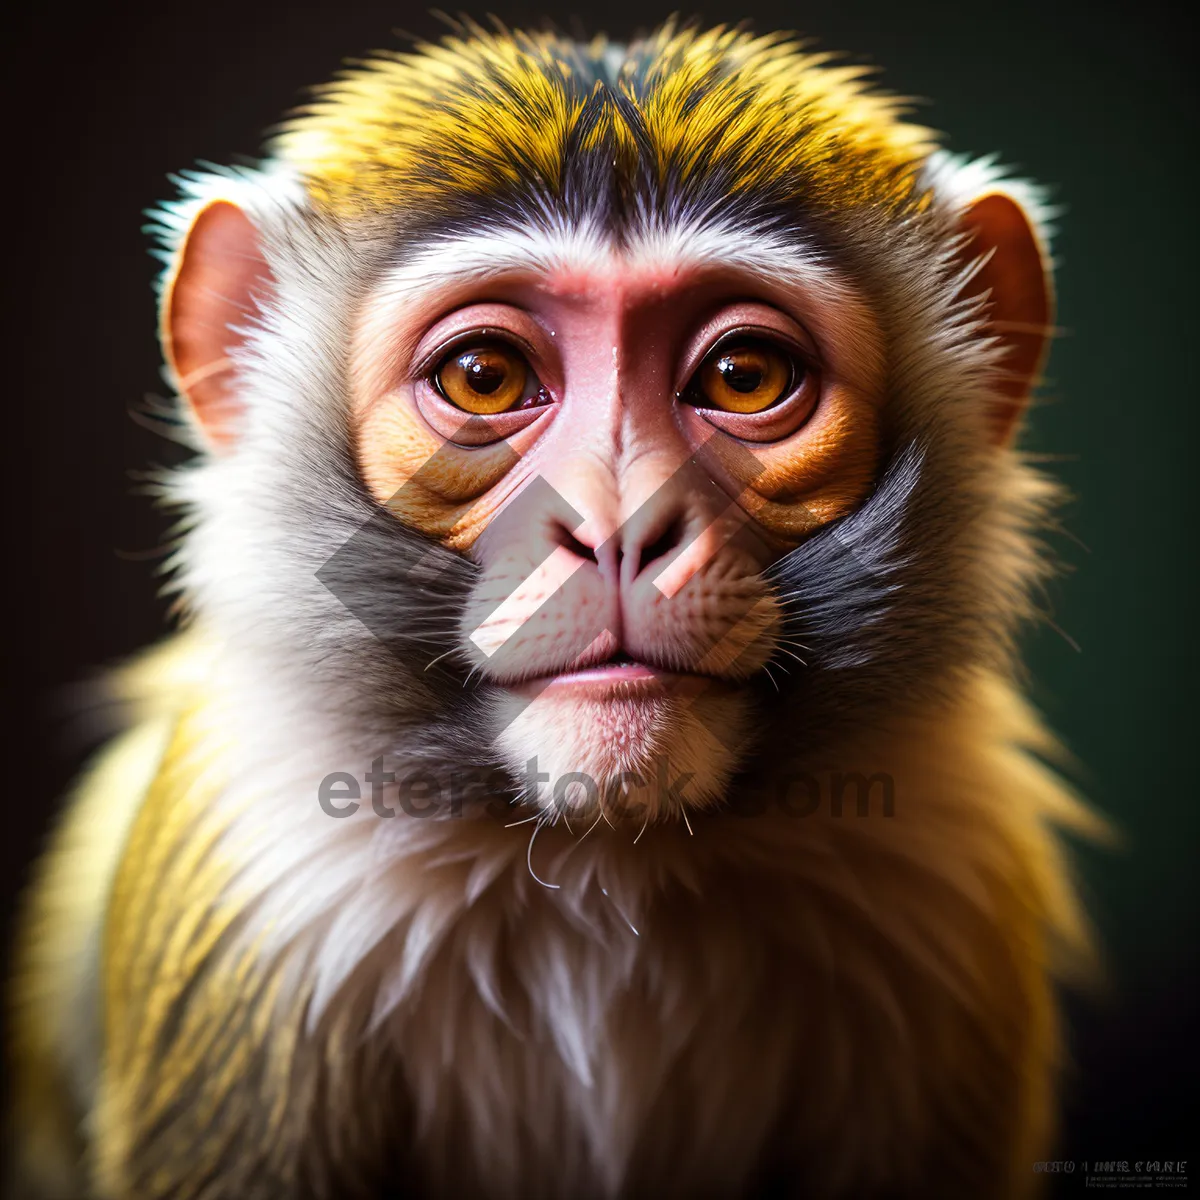 Picture of Wild Macaque Monkey with Piercing Eyes